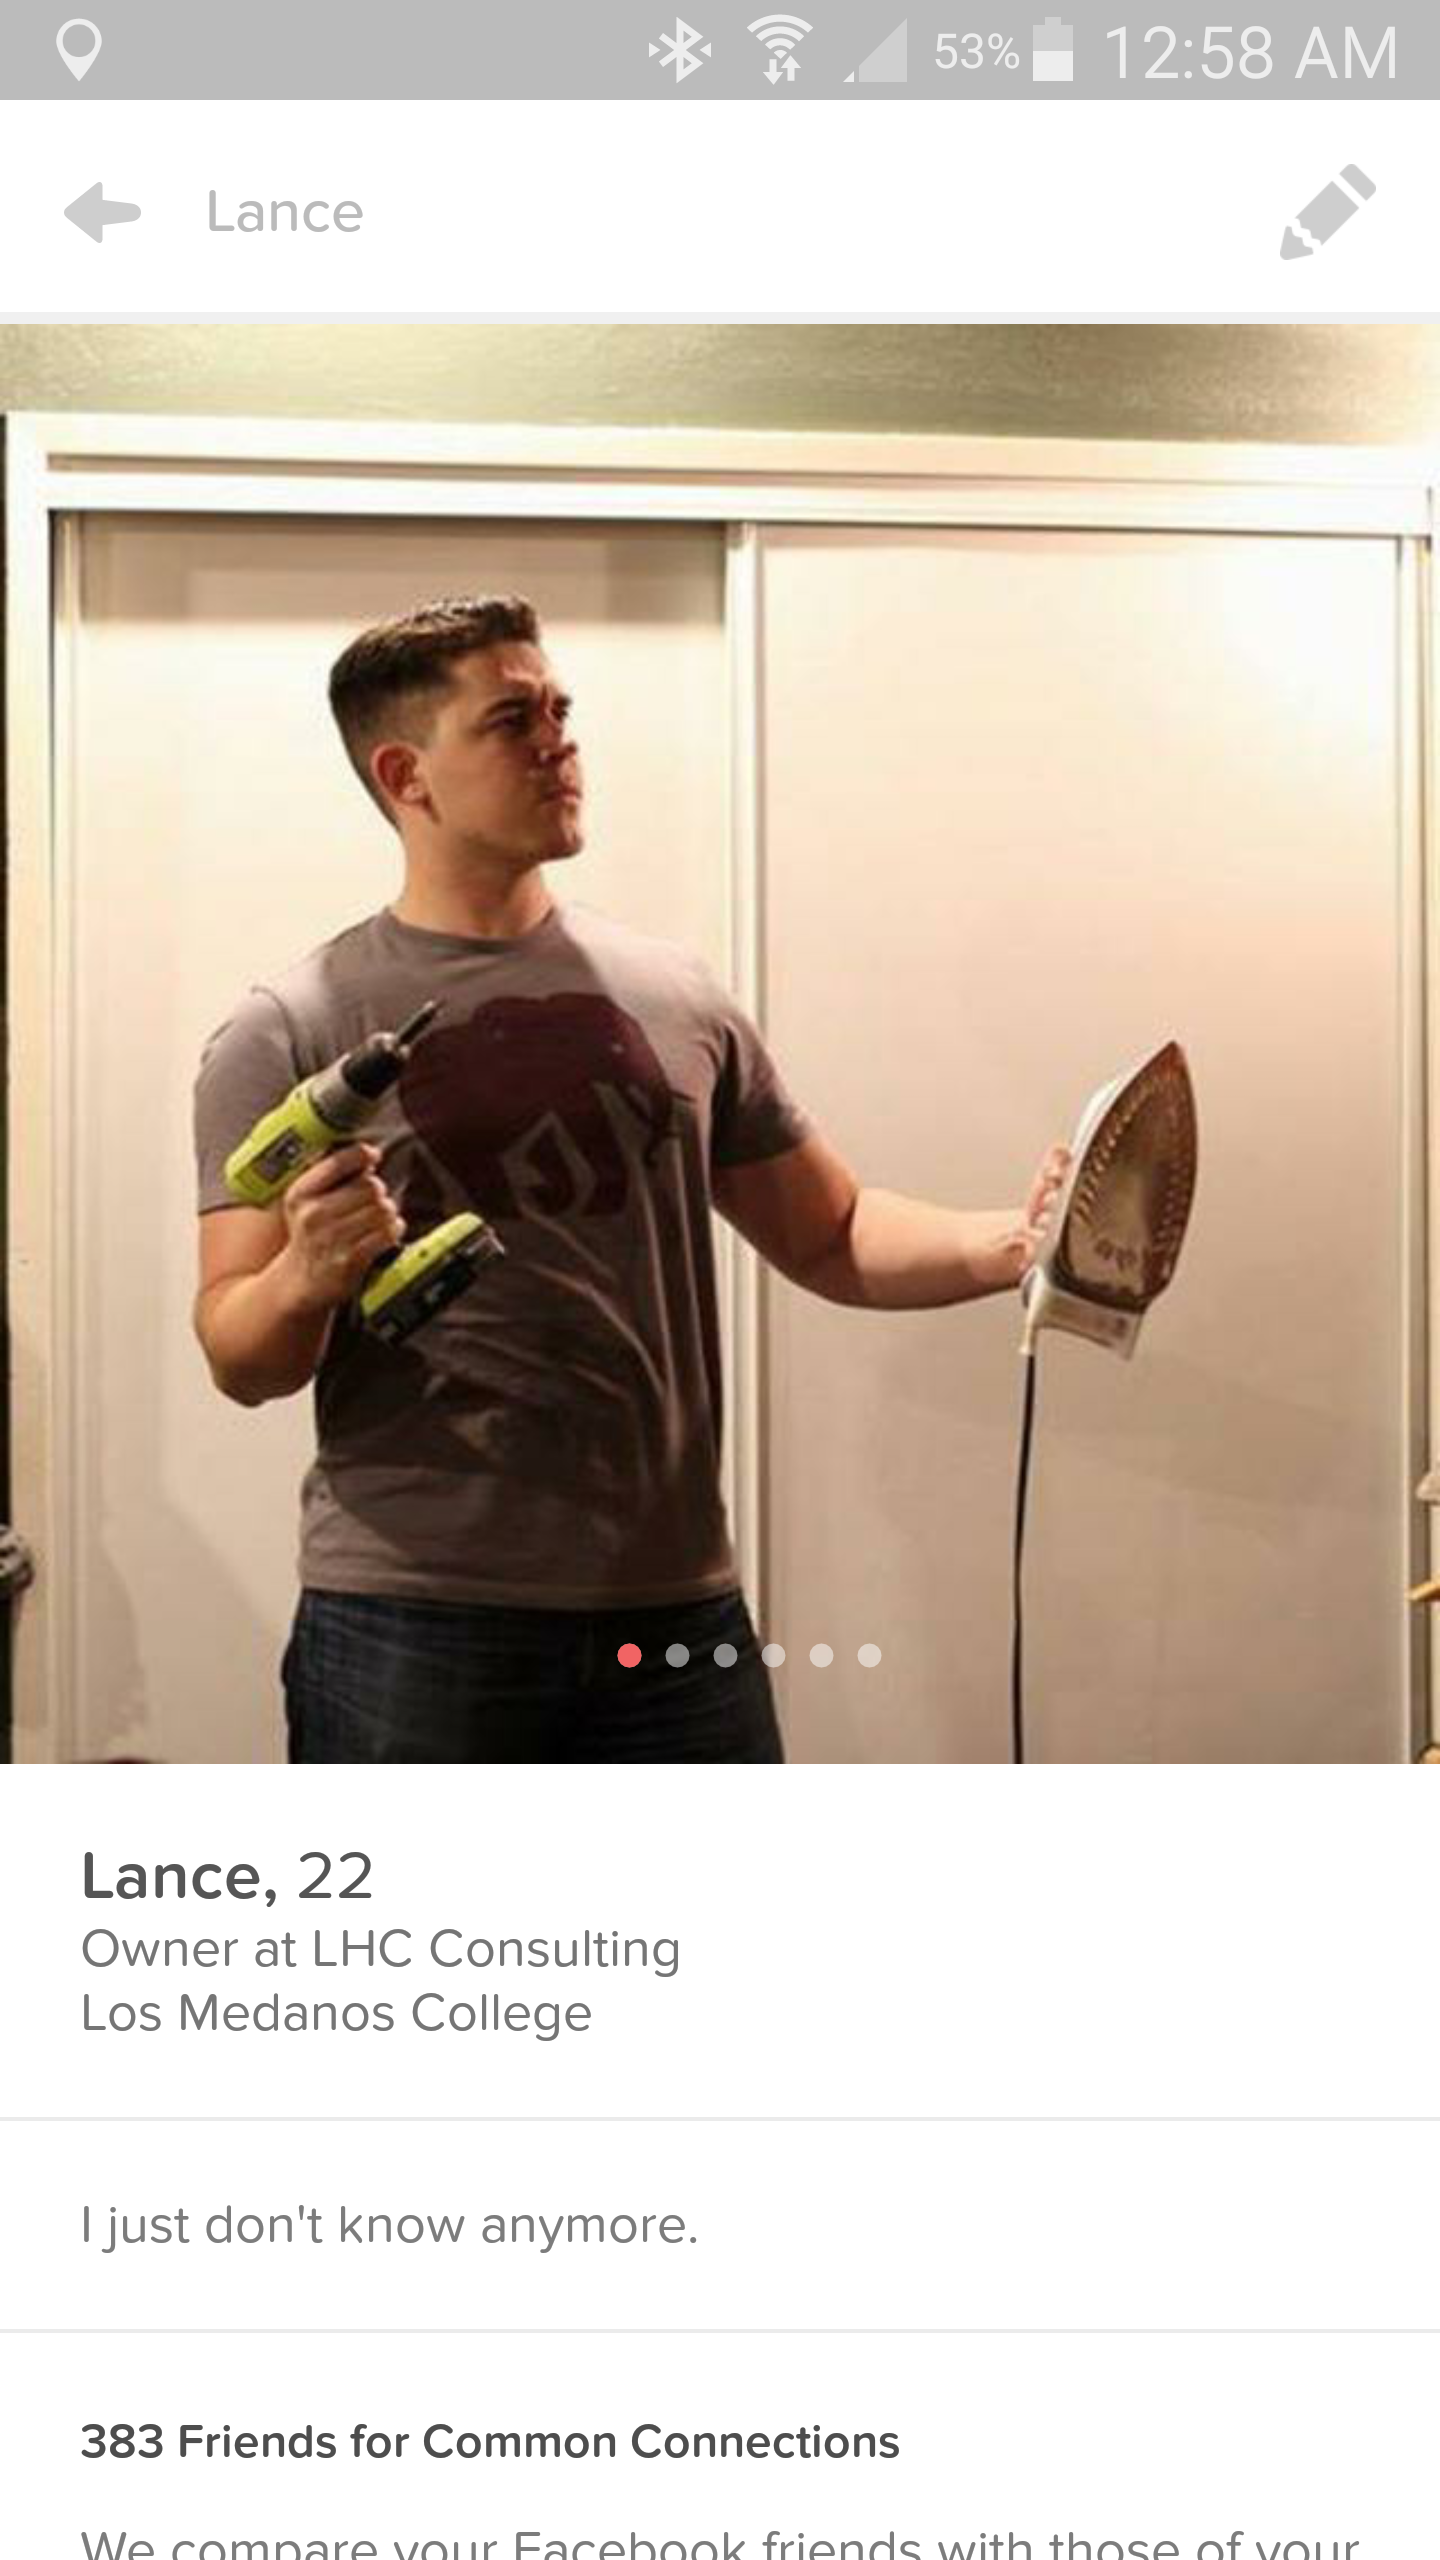 tinder alpha - 53% Lance Lance, 22 Owner at Lhc Consulting Los Medanos College I just don't know anymore. 383 Friends for Common Connections Wamnarevo Farebi s with the